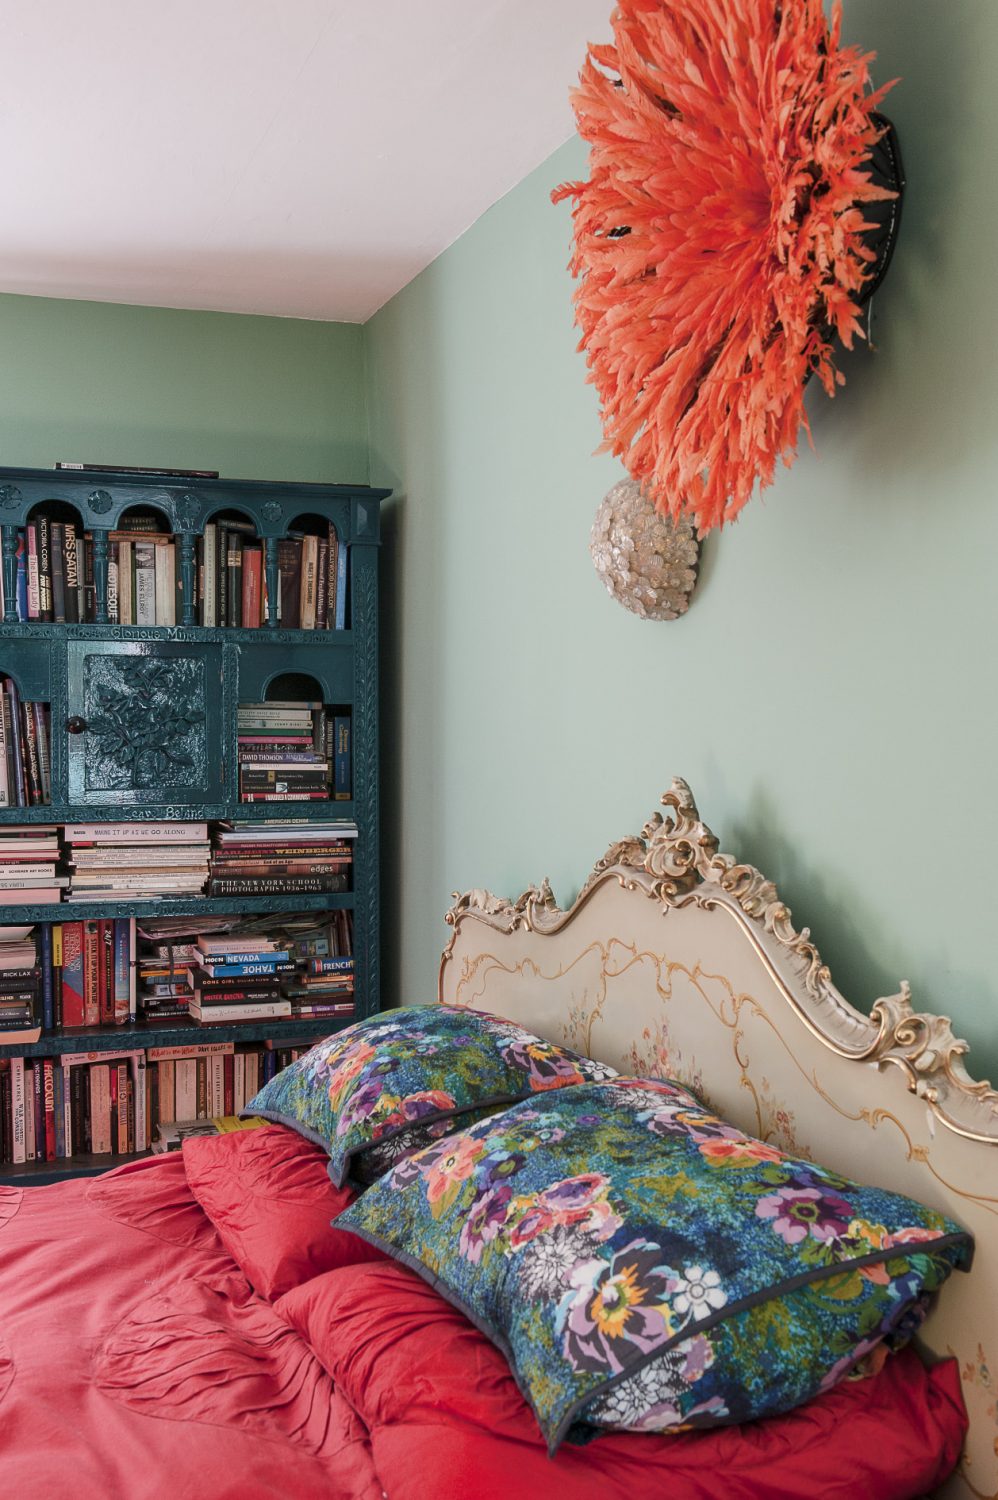 The bedroom features a 1950s Italian gilded bed above which is mounted an orange feathered headdress from the Cameroon